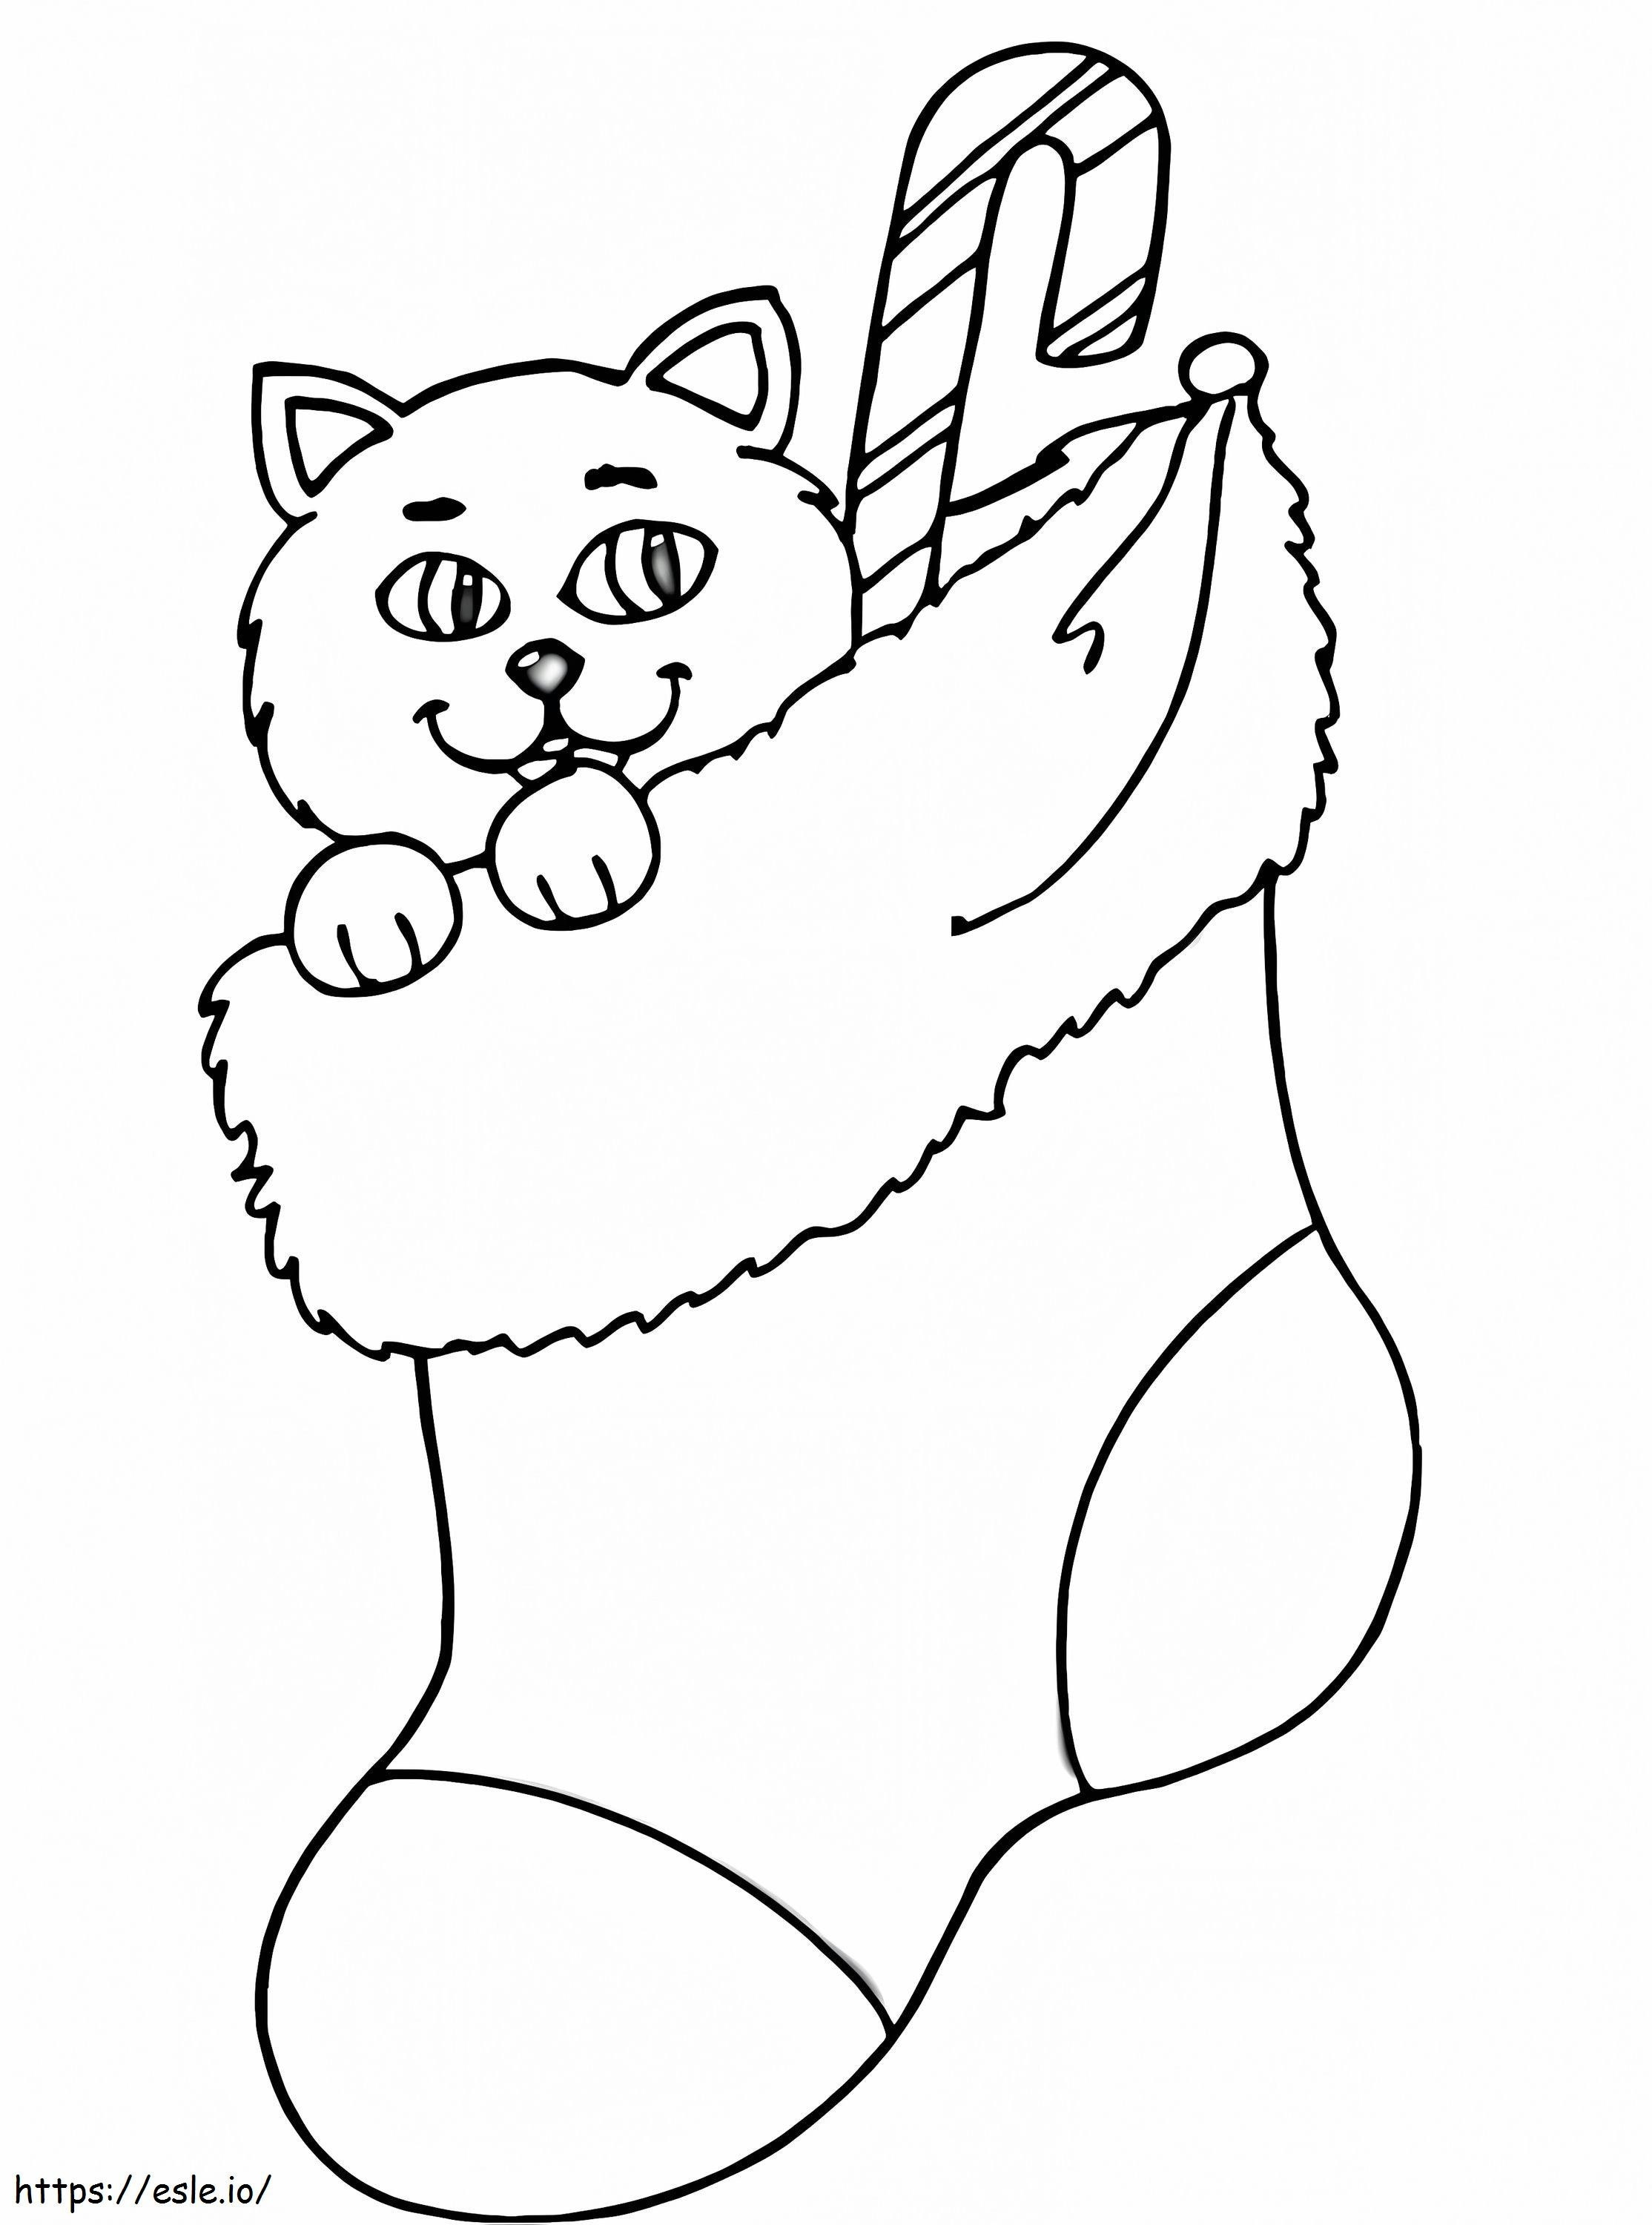 Cat In Christmas Stocking coloring page